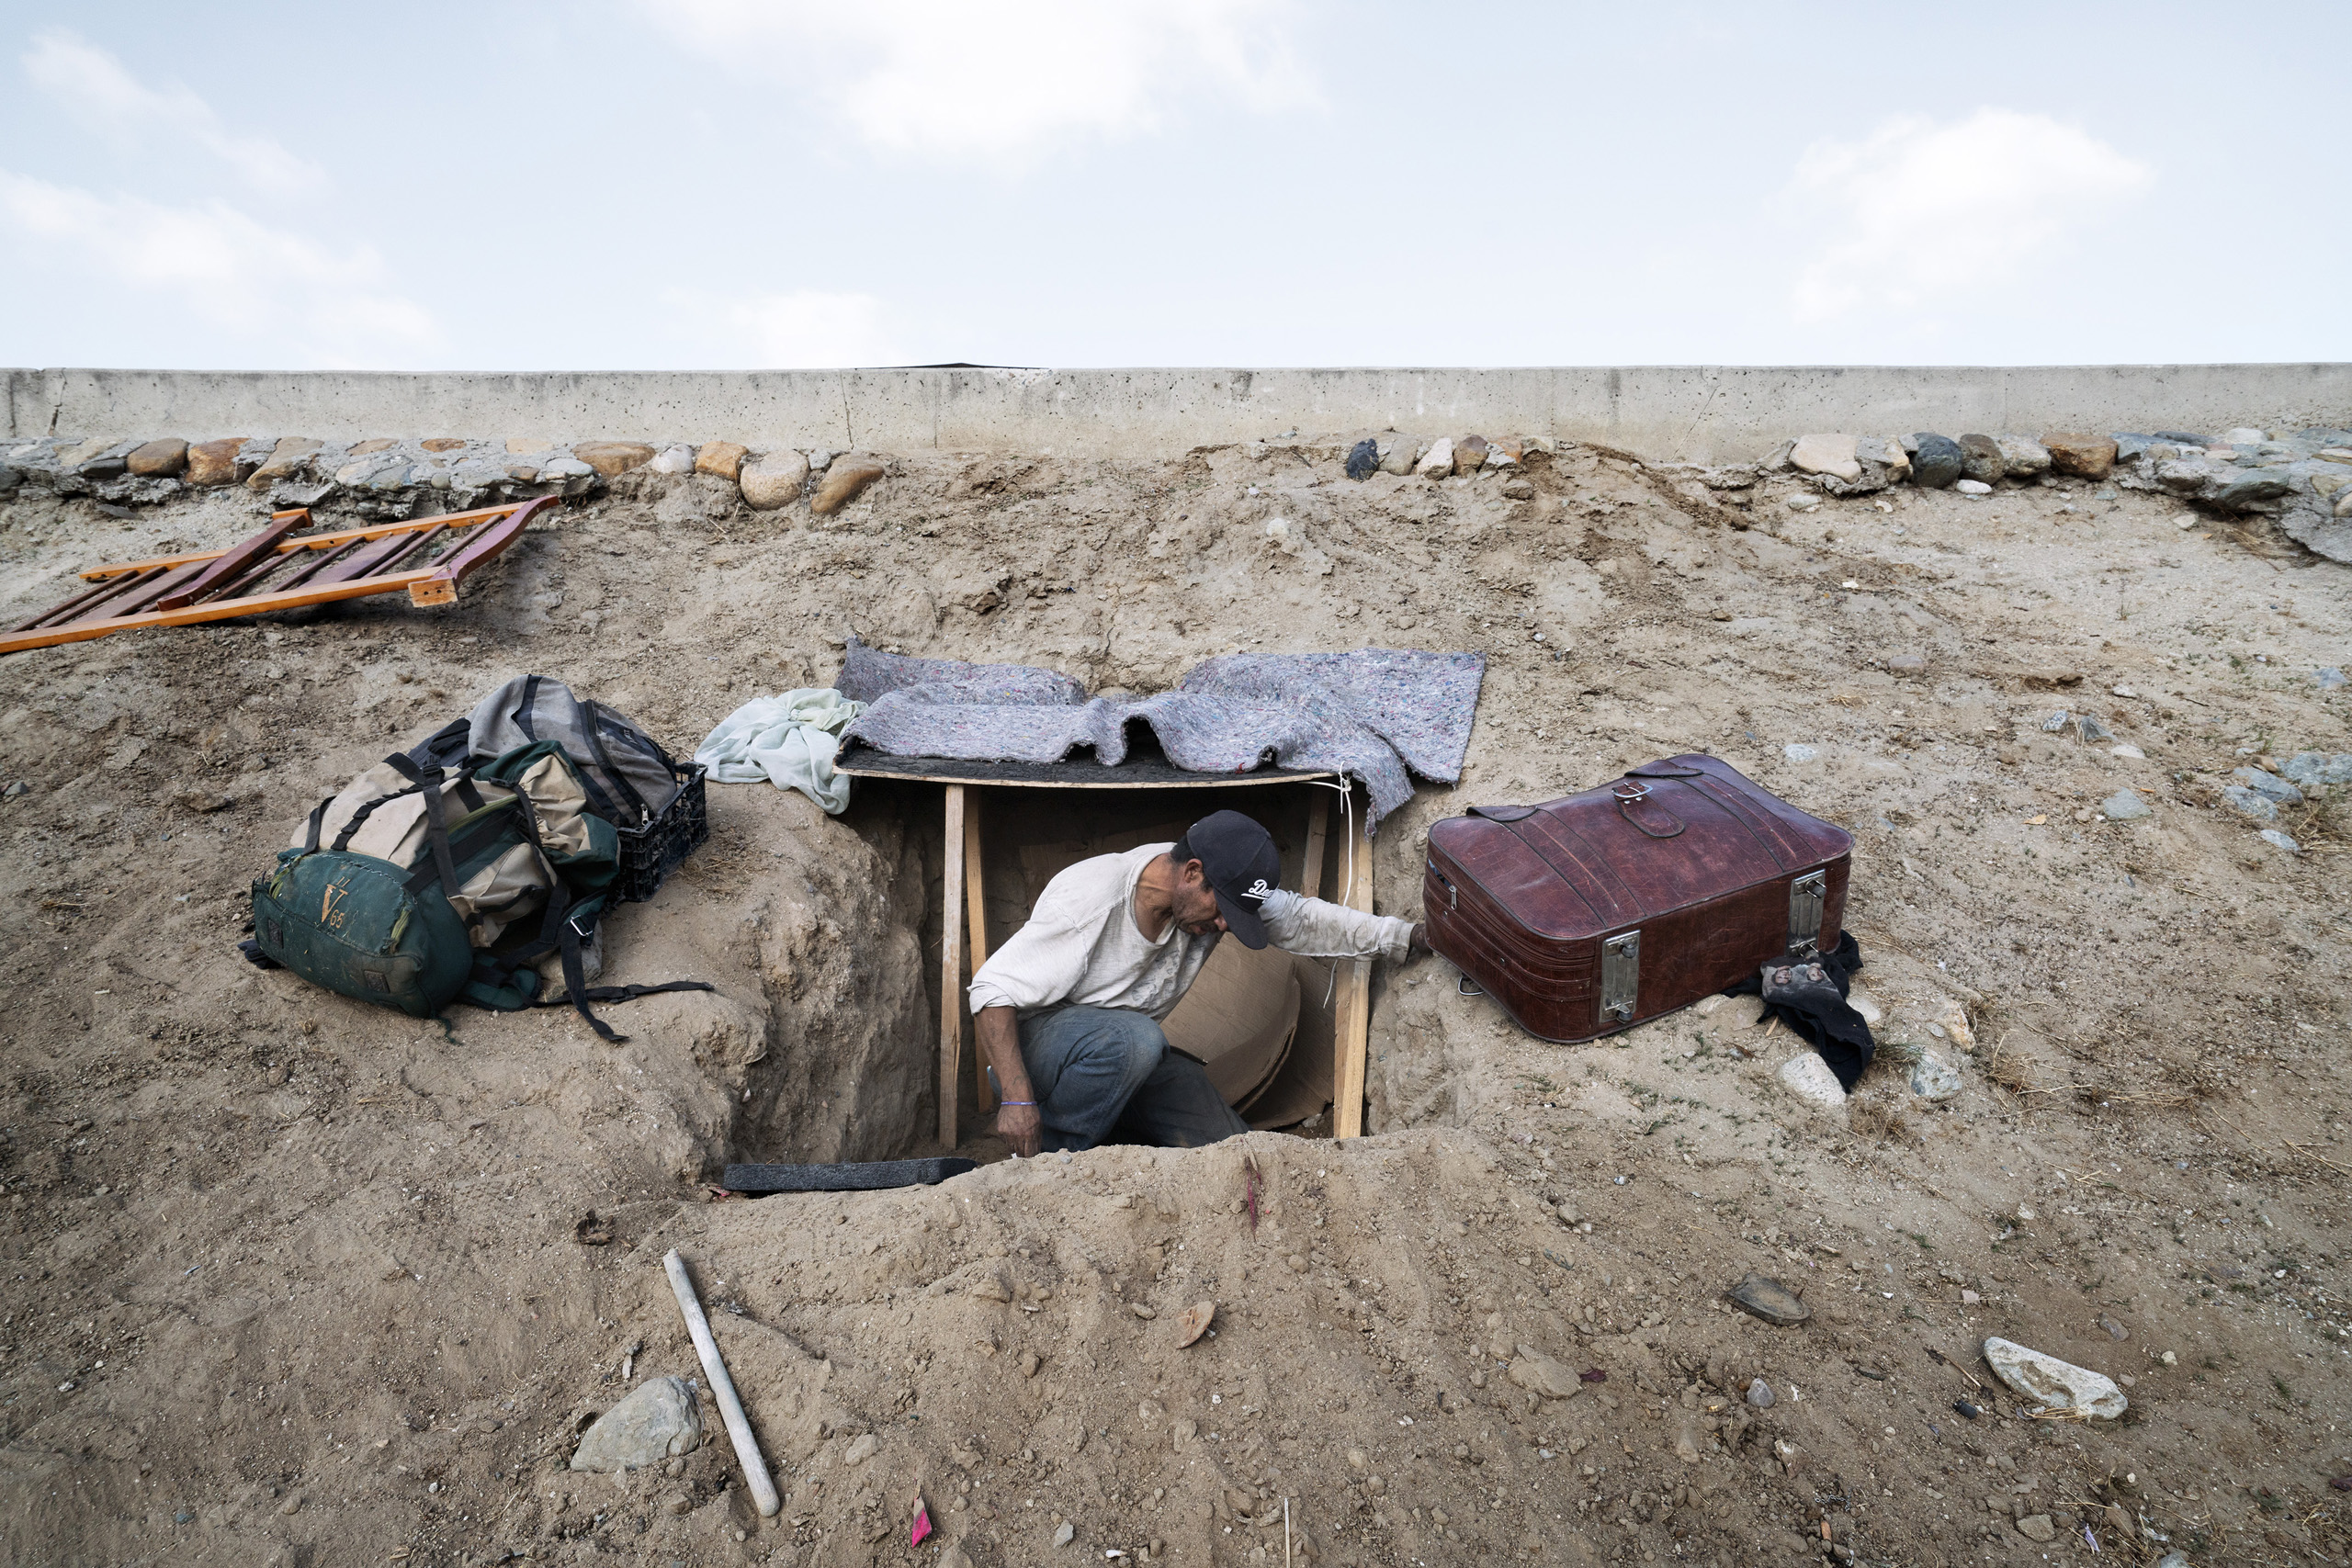 Along the border between Mexico and the U.S., José, a Mexican migrant from Guadalajara, is building a shelter just few paces from the border, waiting for the right time to cross. Tijuana, Baja California, Mexico. Oct. 13, 2016.